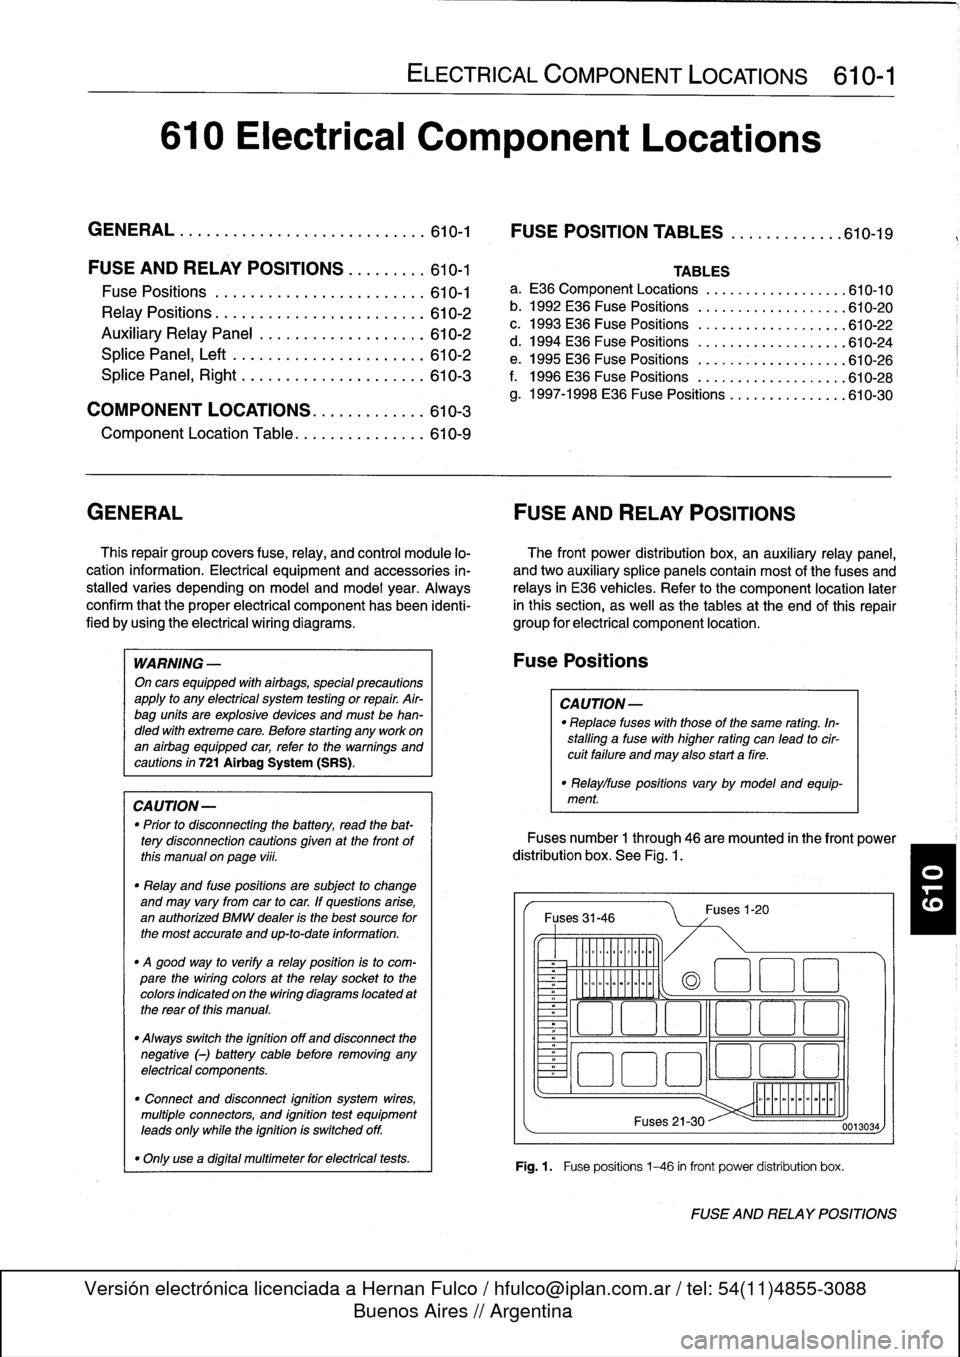 BMW 323i 1993 E36 Workshop Manual 
610
Electrical
Component
Locations

GENERAL
...........
.
.
.
.
.
.
.
.
.
........
610-1

	

FOSE
POSITION
TABLES
..
.
.
.
.
.
.....
.
610-19

FUSE
AND
RELAY
POSITIONS
.
...
.
.
.
.
.
610-1

Fuse
Pos